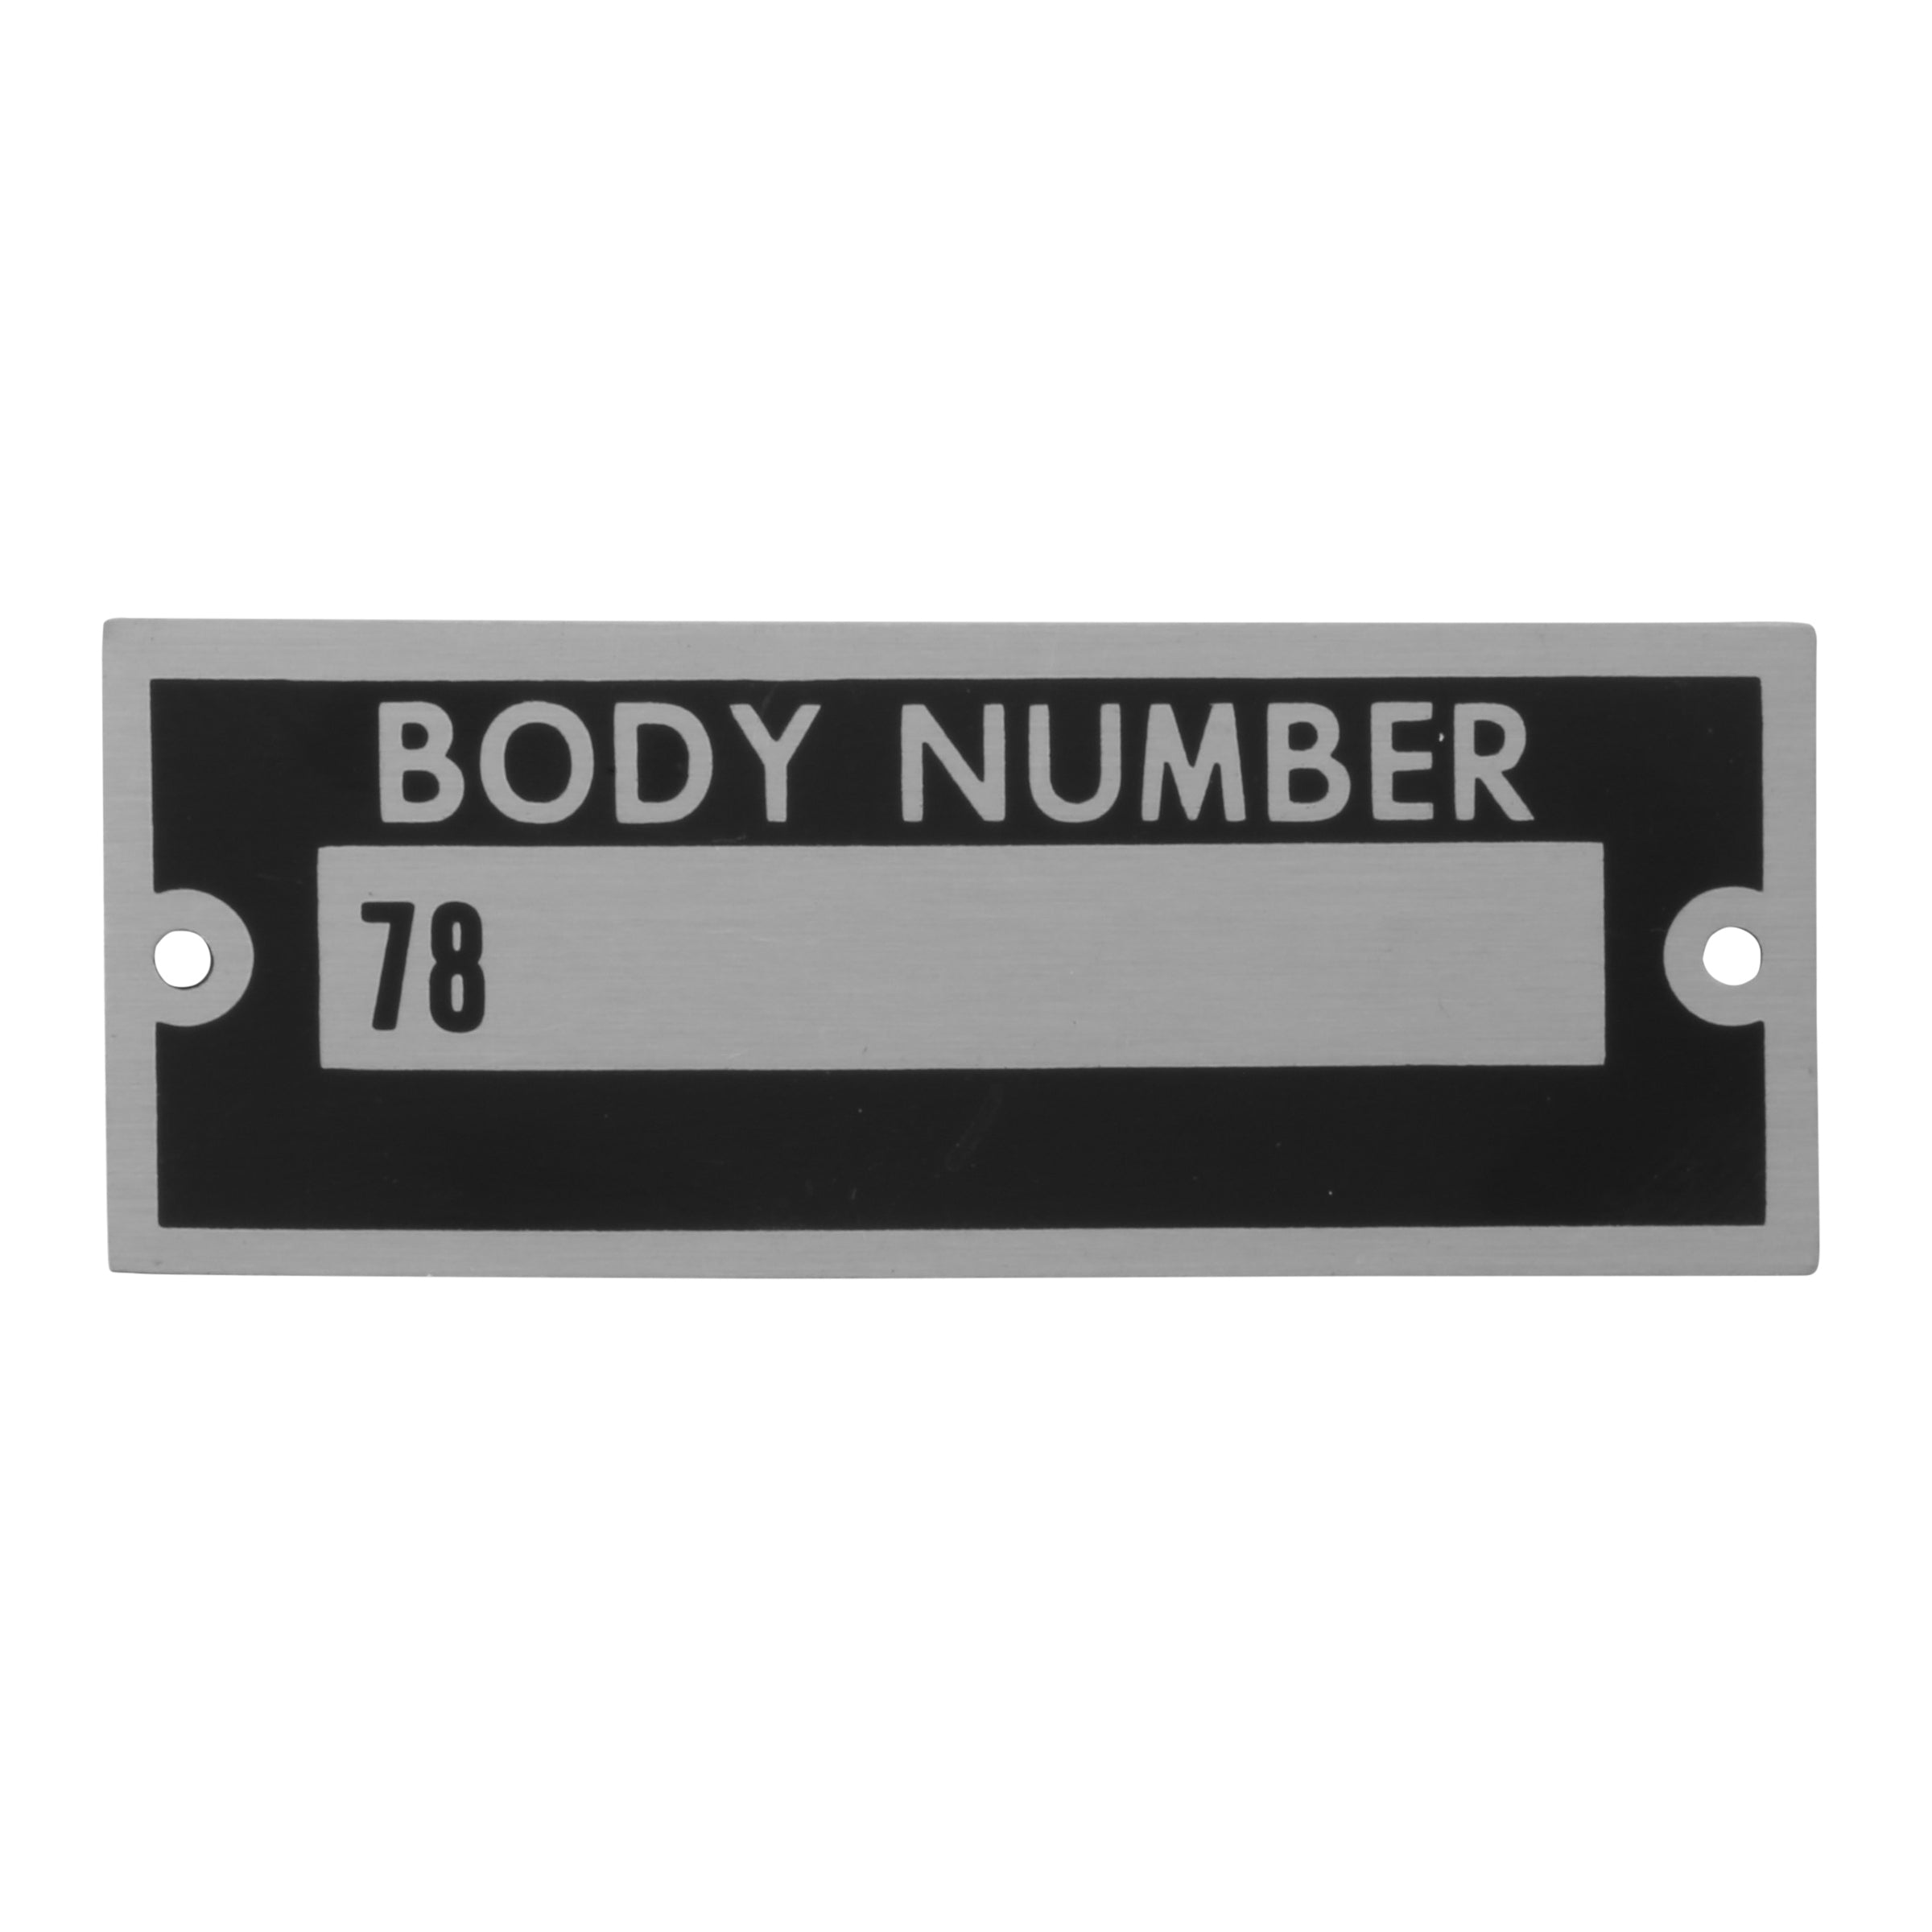 Body Number Plate • 1937 Ford Passenger